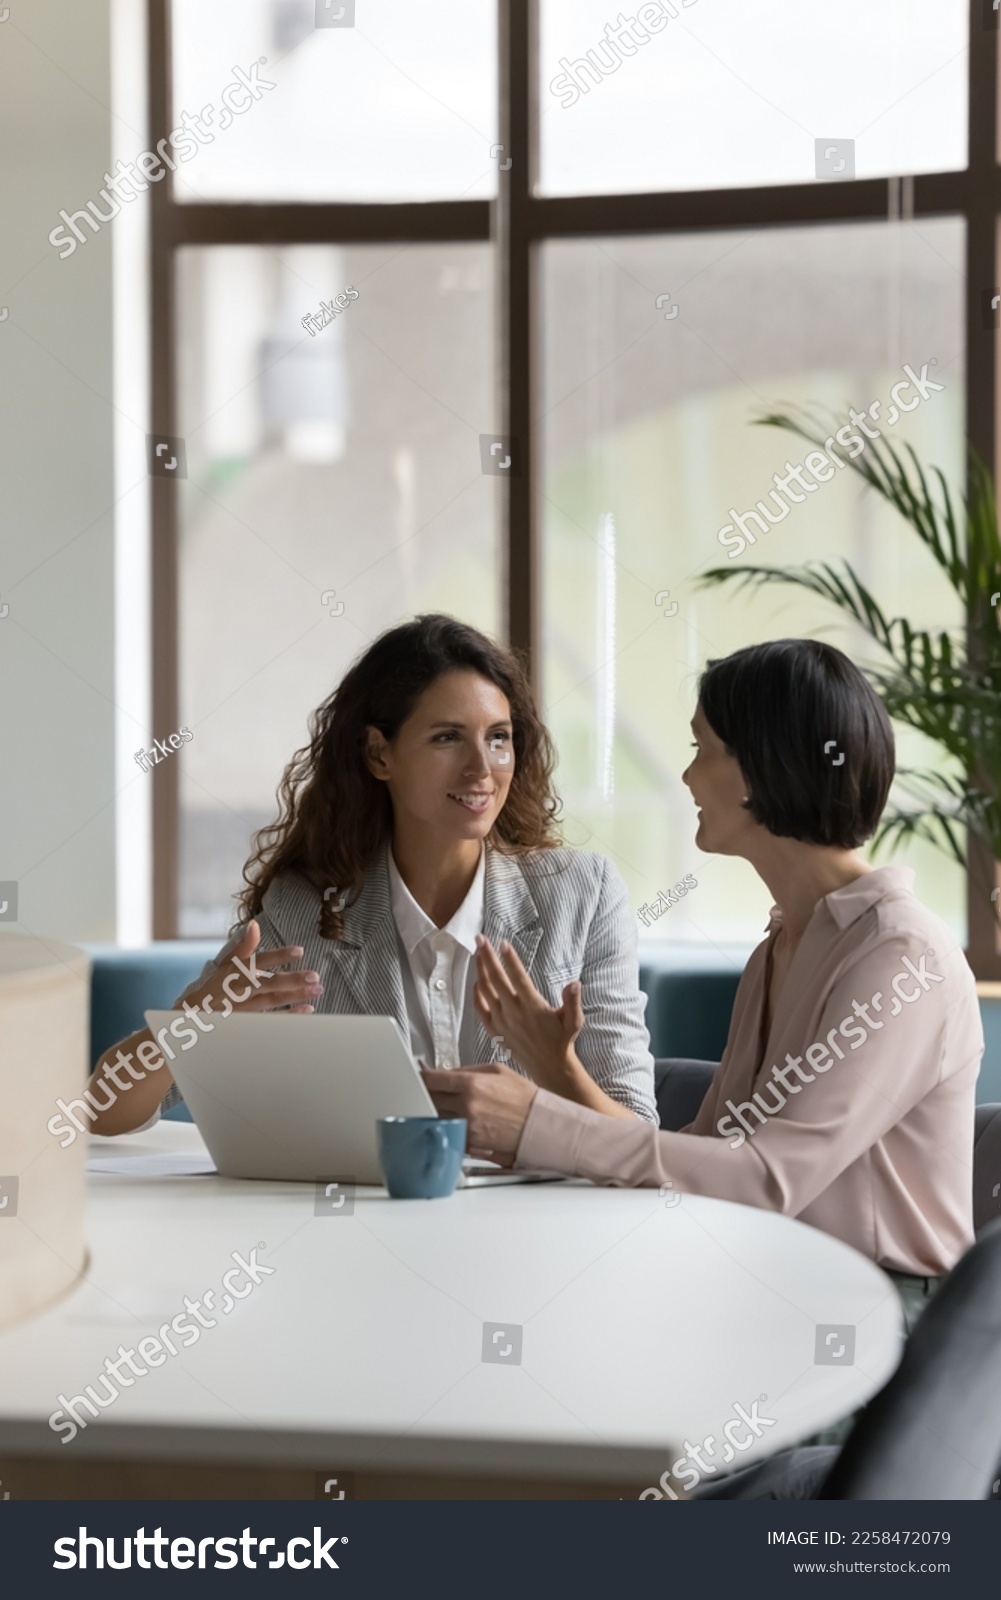 Two happy engaged business professionals women brainstorming on online project at laptop, speaking, discussing creative ideas, plan, strategy, task, chatting at work desk in office #2258472079